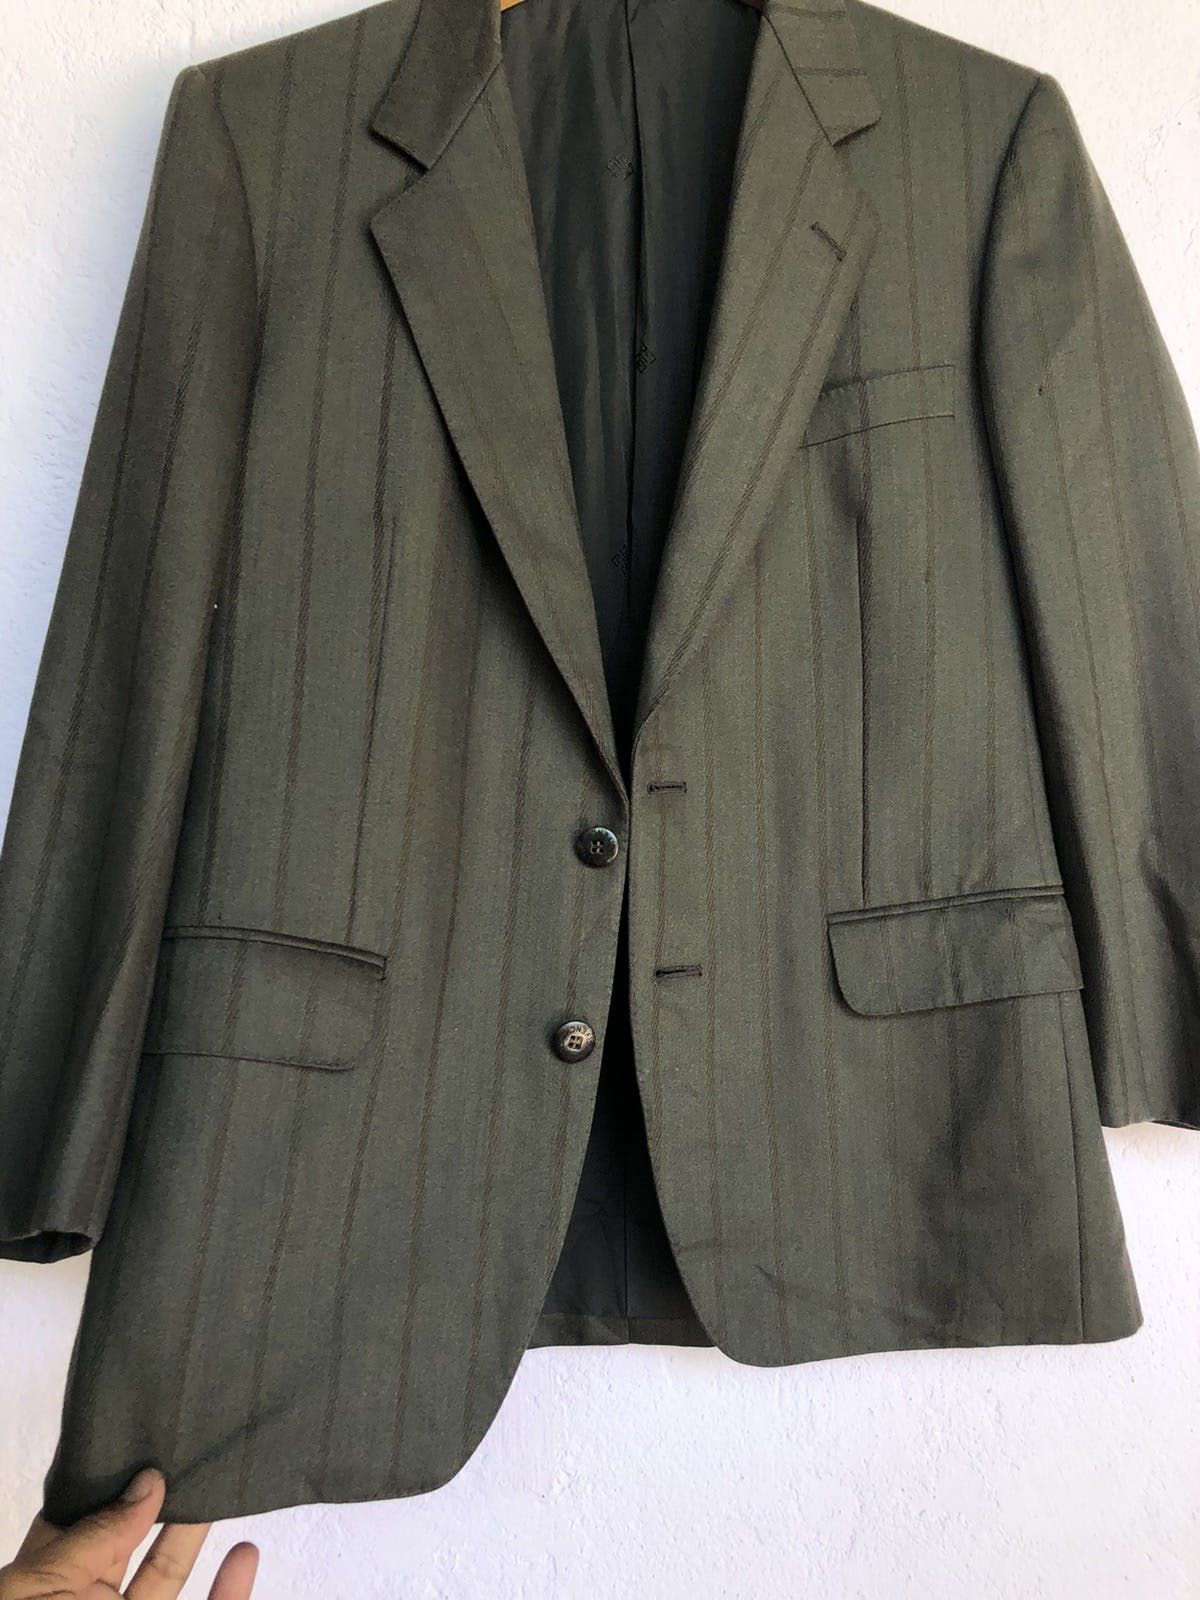 Givenchy Men’s tailored jackets good condition - 5